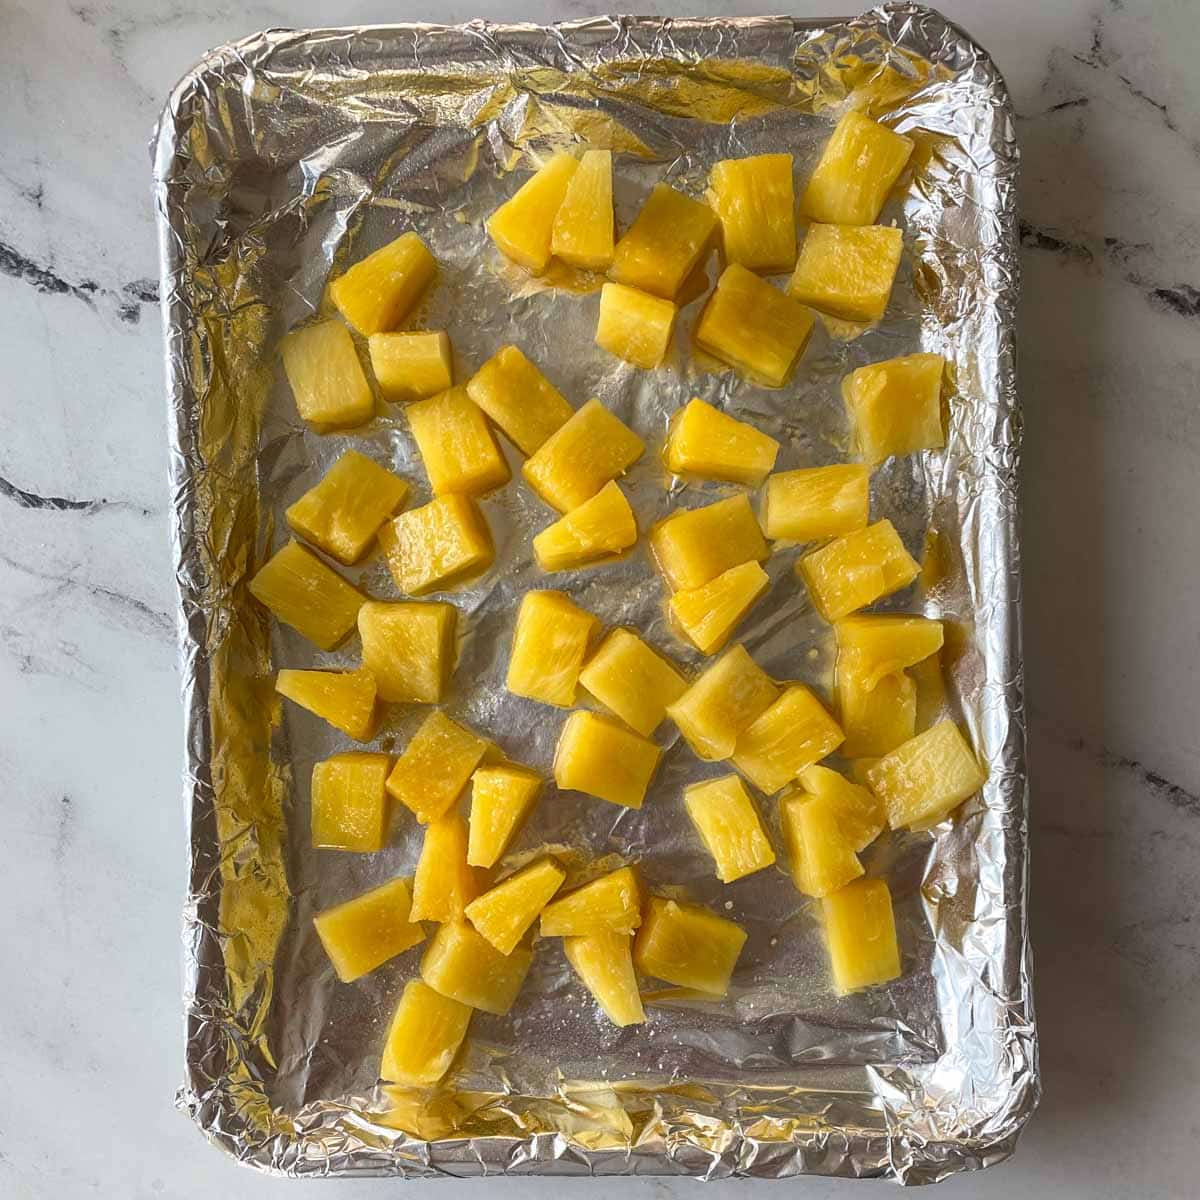 Pieces of pineapple sit on a sheet tray.